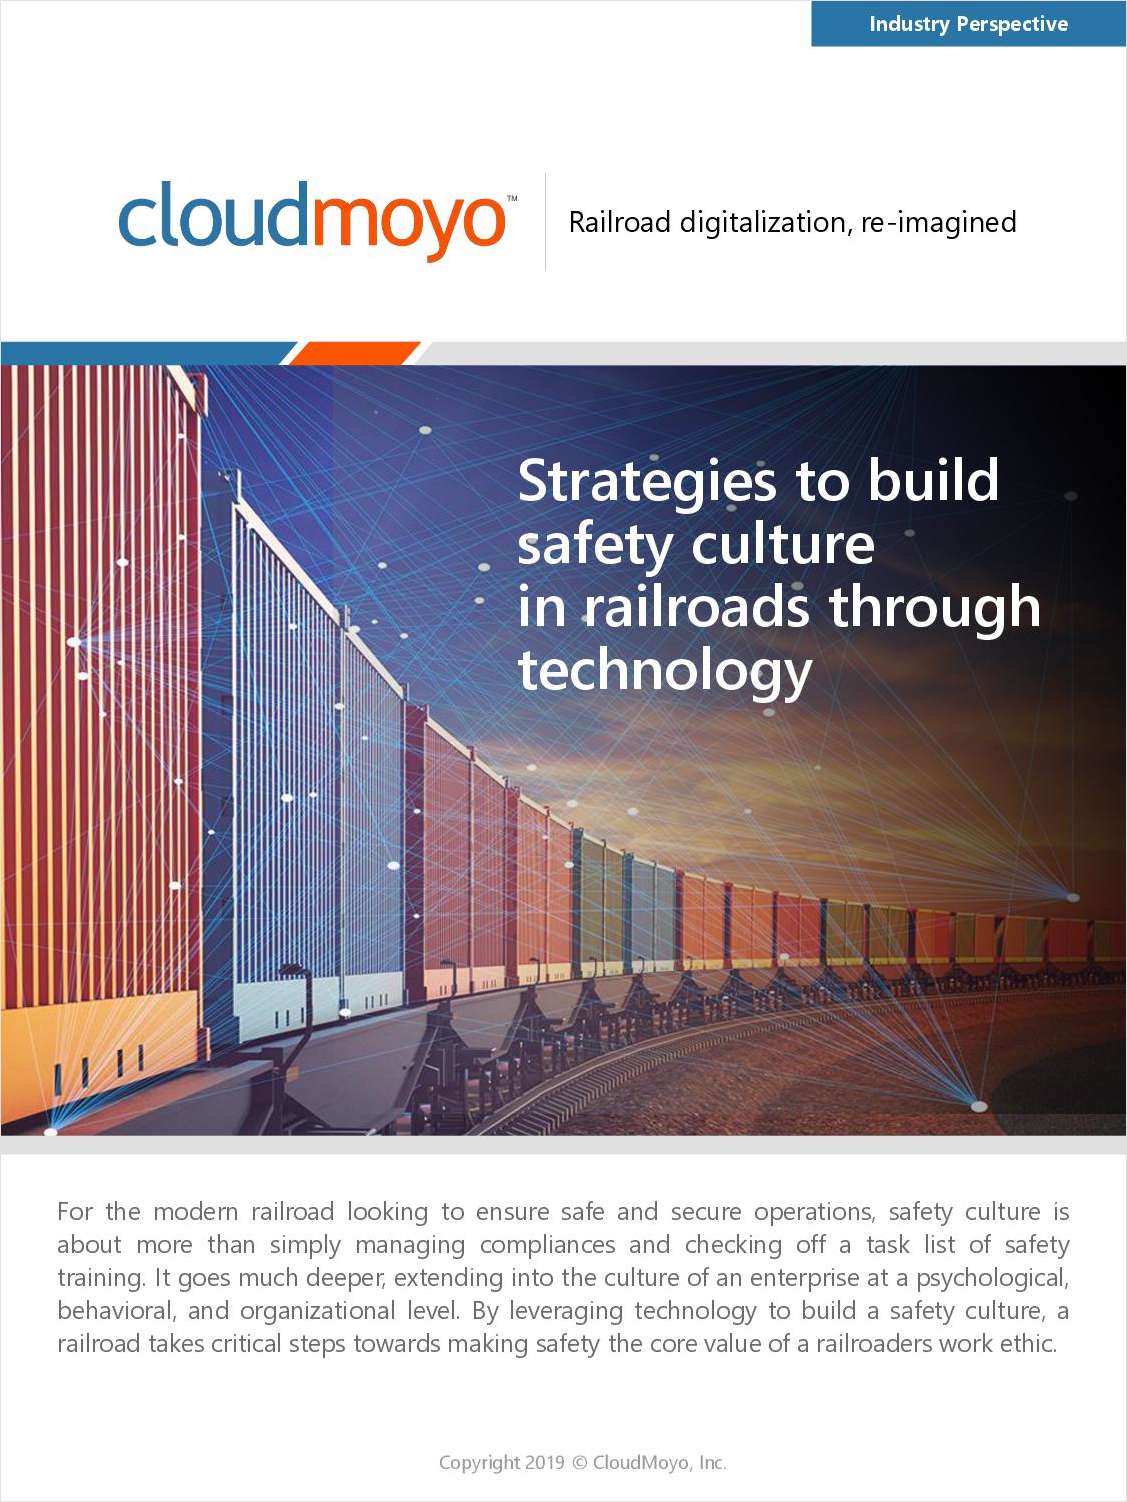 Strategies to build safety culture in railroads through technology